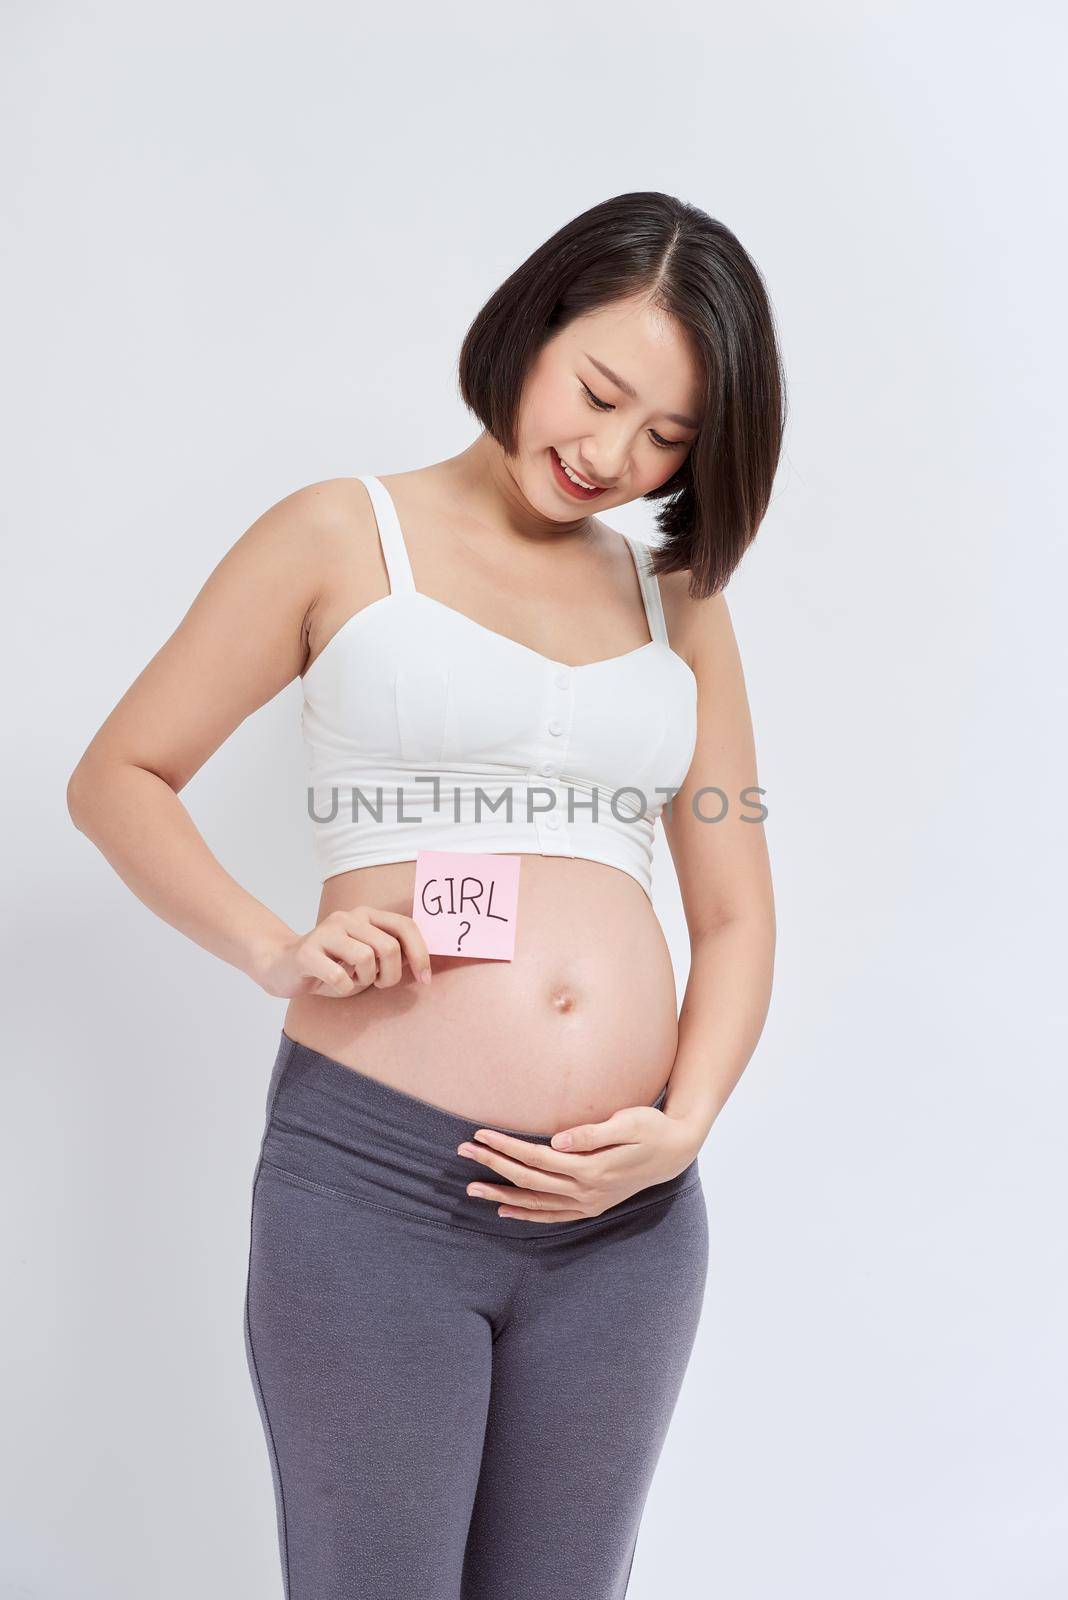 Pregnant woman with a sticky note saying Girl on her belly. Isolated on white background. by makidotvn